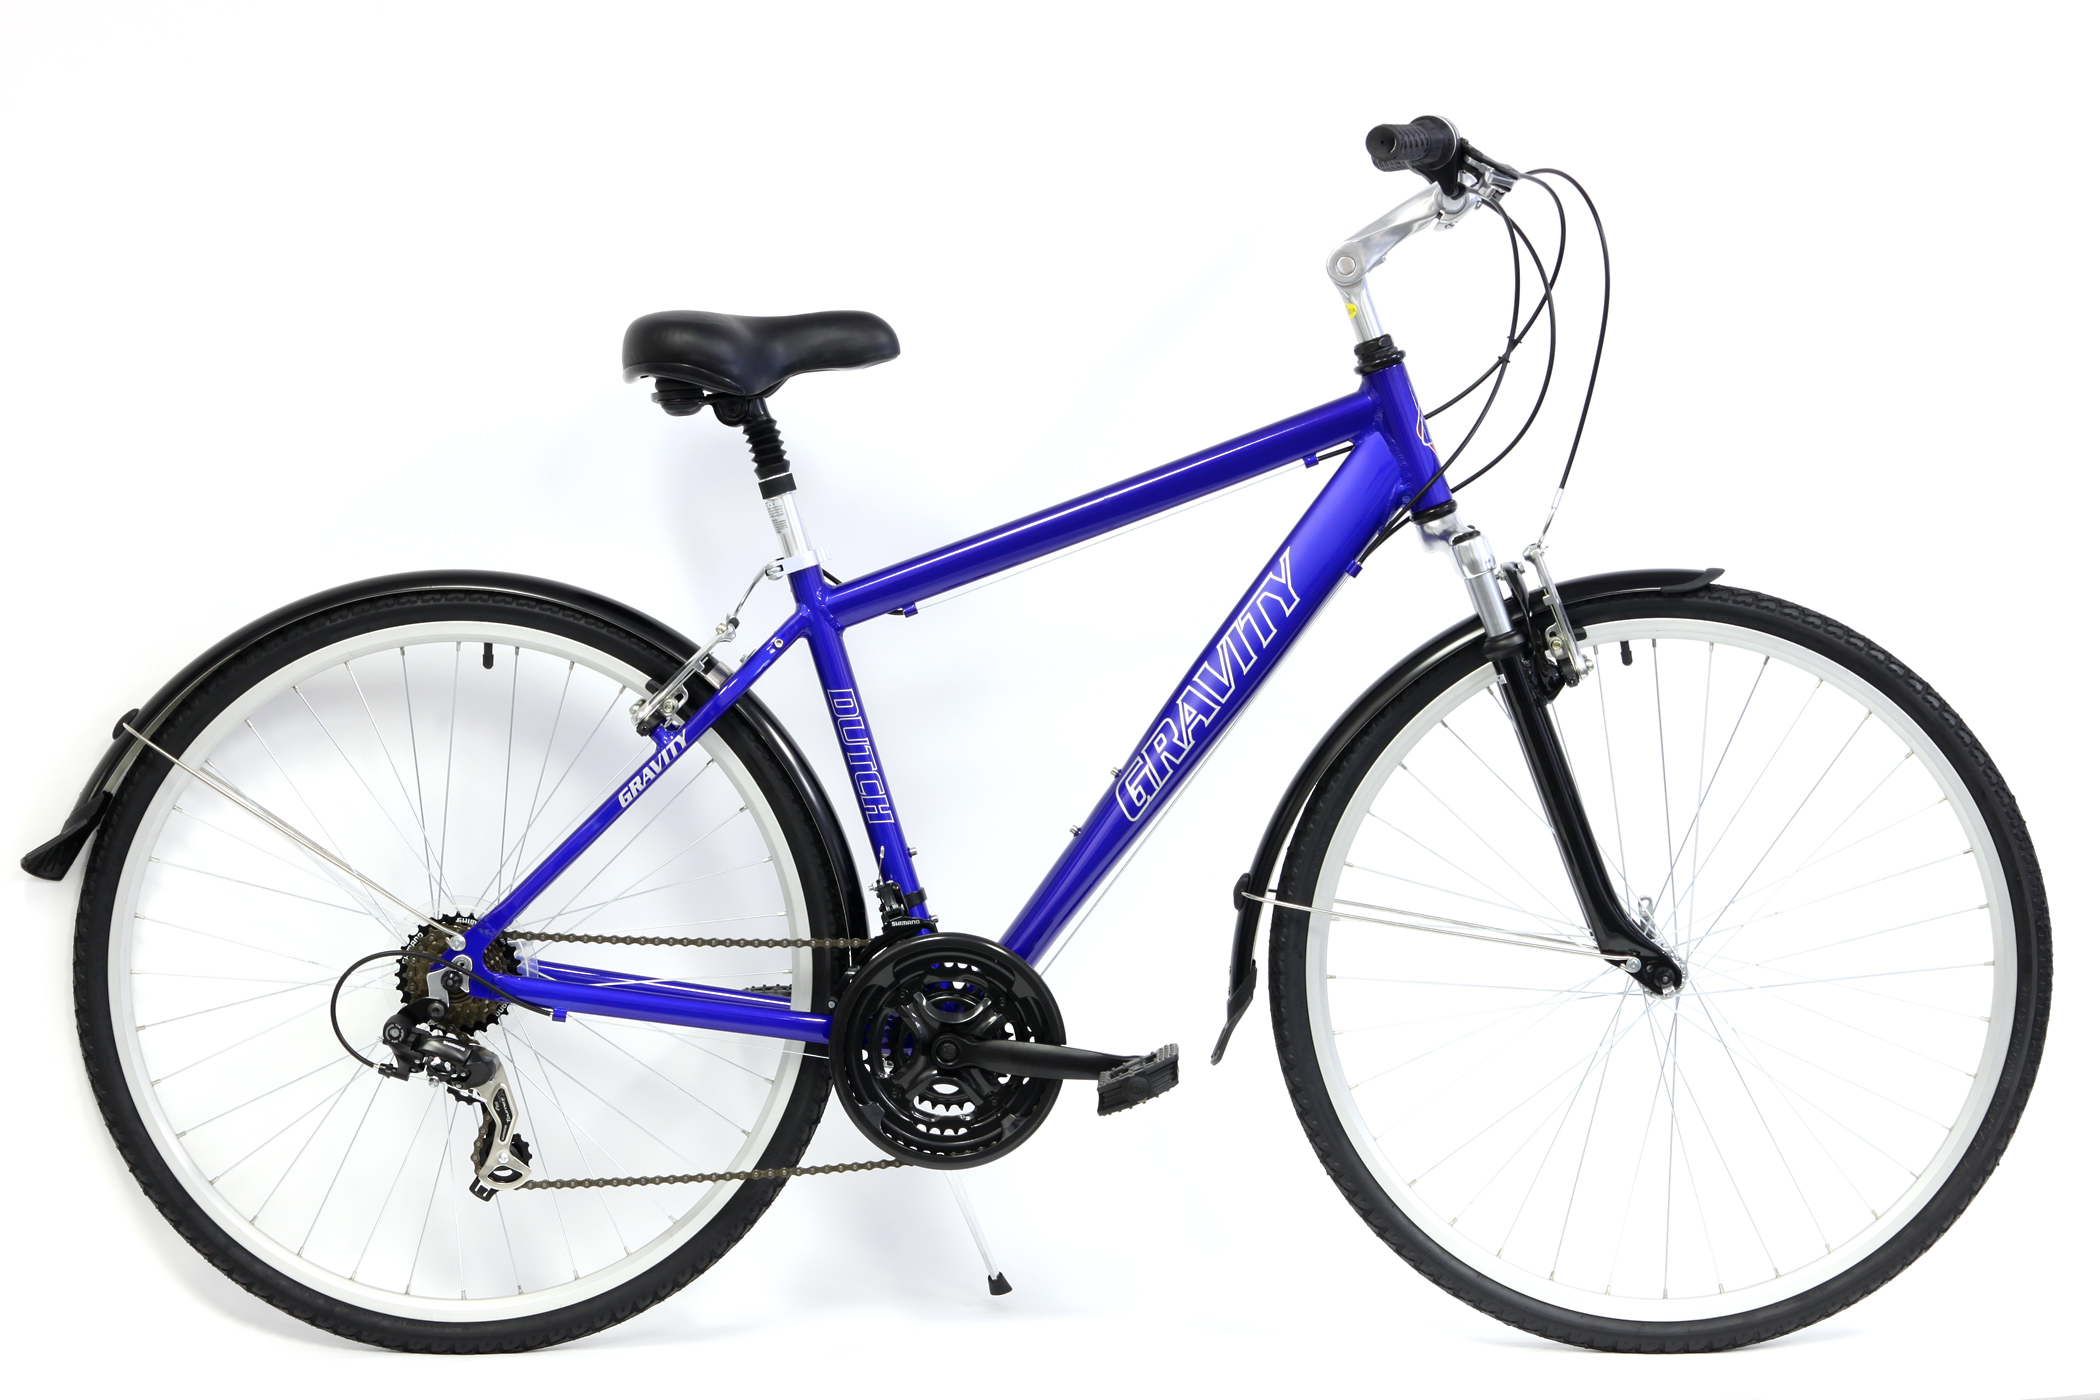 Save Up to 60% Off Bikes *ALL BIKES FREE SHIP 48US Gravity Dutch Hybrid, City, Commuter Bicycles Light/Strong Aluminum Hybrid Lifestyle Bikes with Comfy Upright Posture